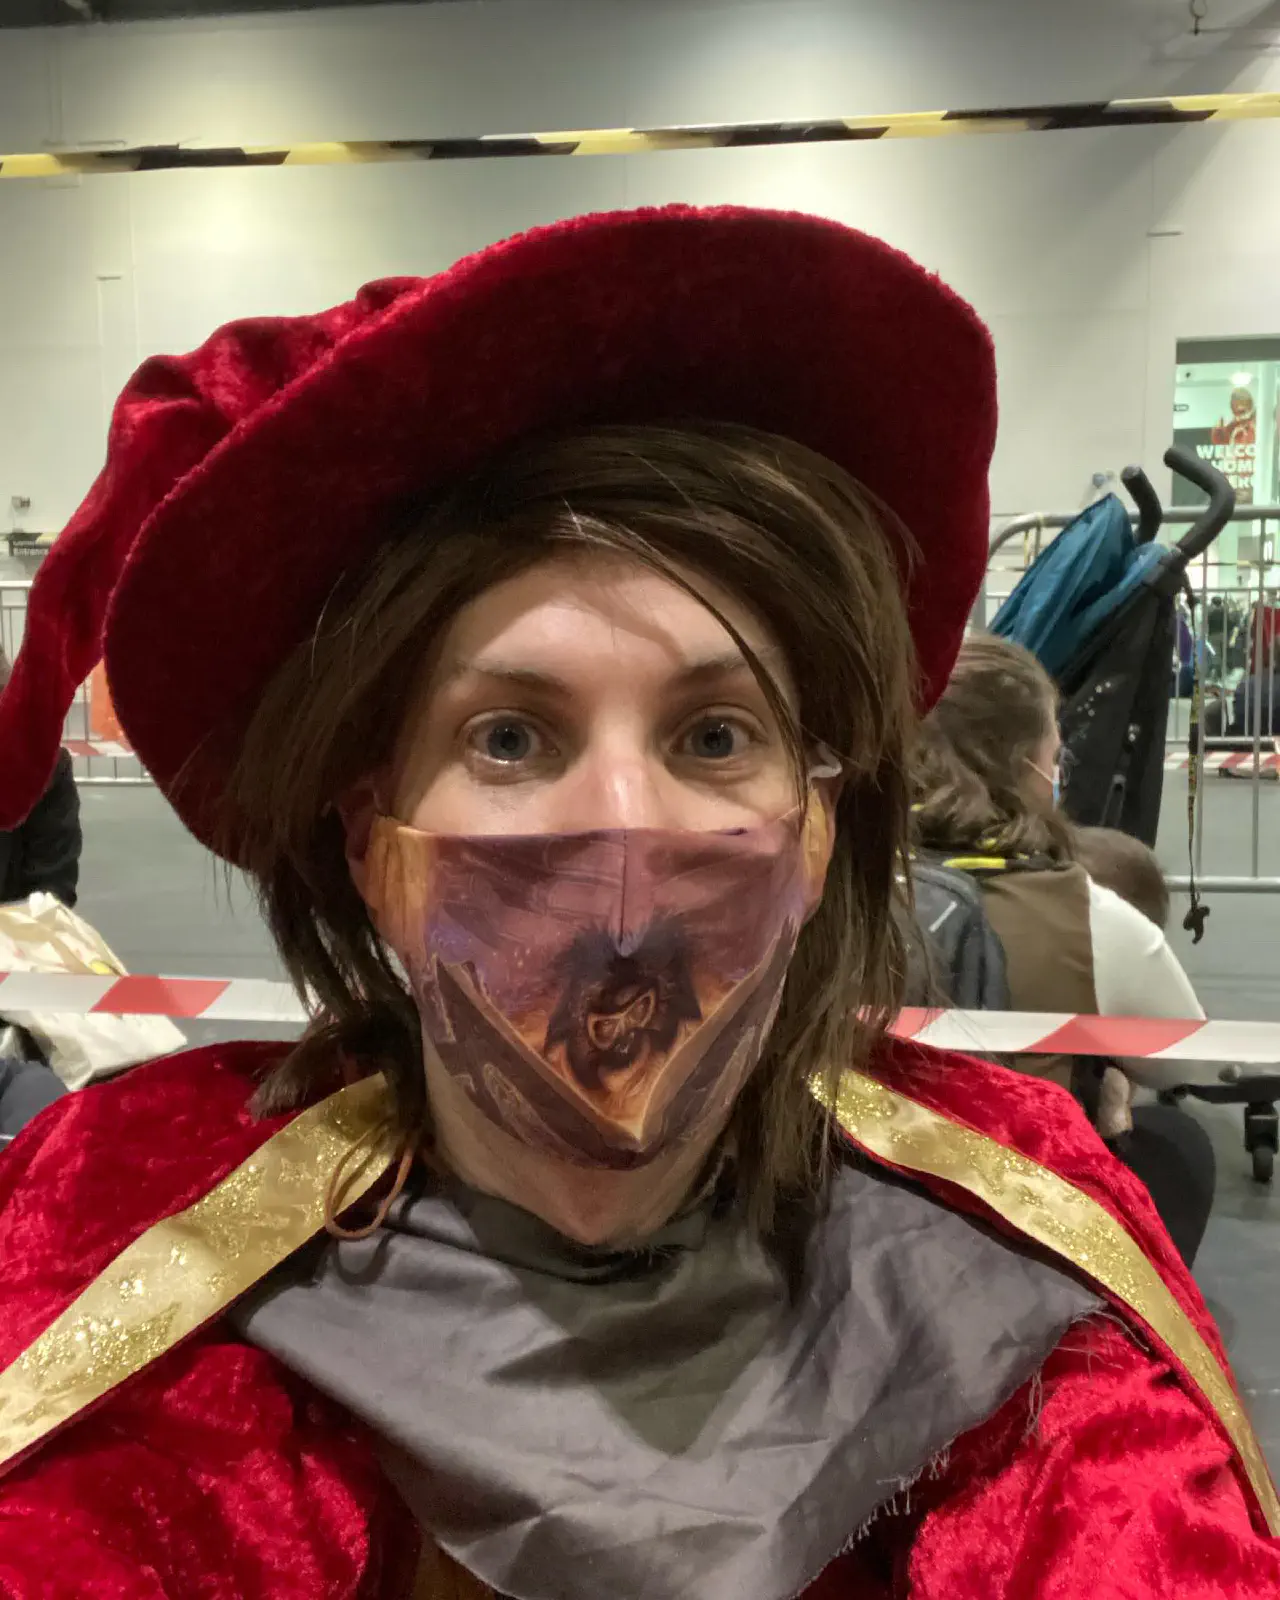 A selfie of myself, sitting down in a red wizards hat and robes, in cosplay as Rincewind